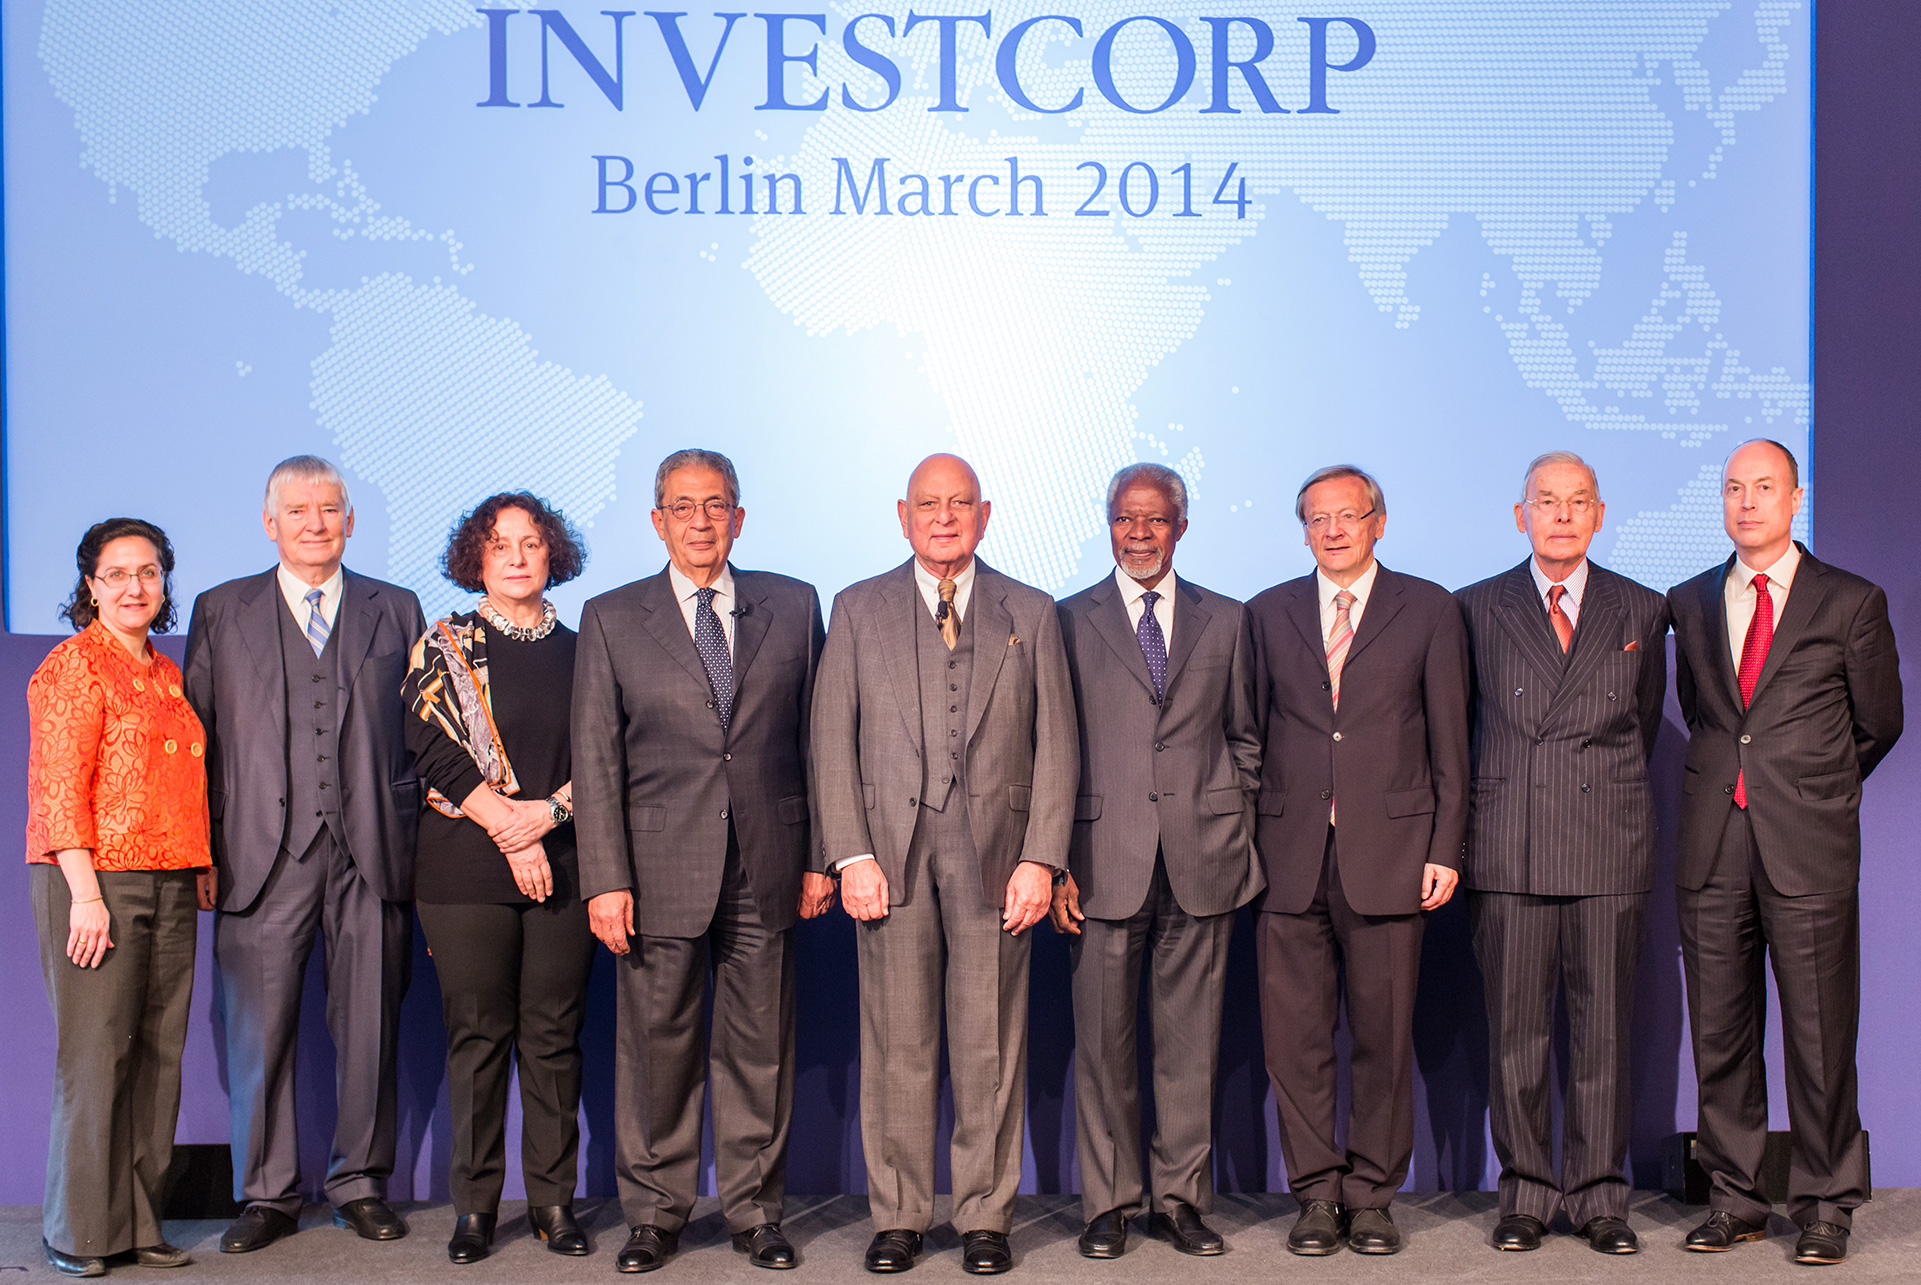 Investcorp acquires Germany's leading cybersecurity company, Avira -  Investcorp